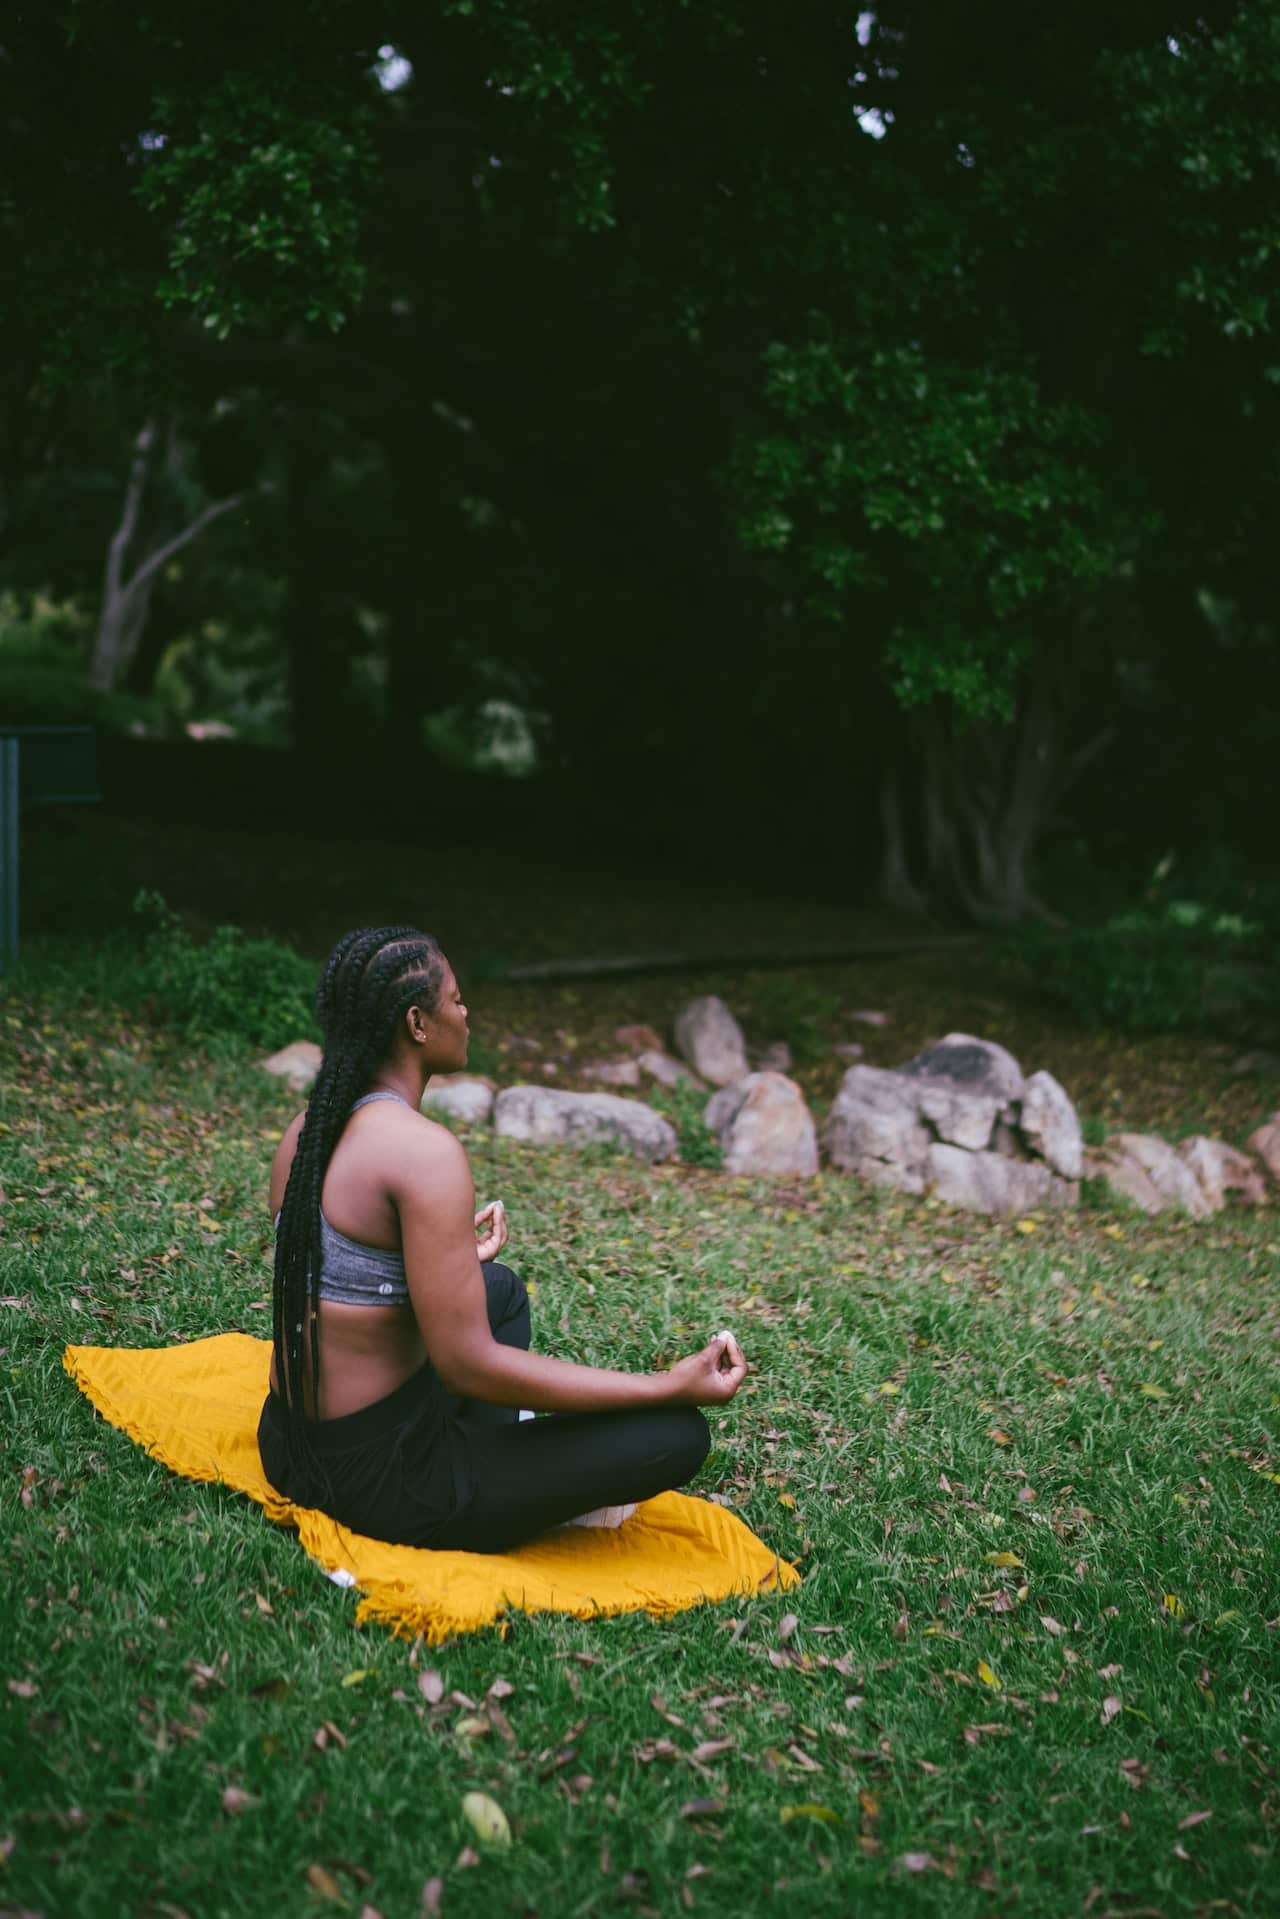 A black woman with long braids is sitting cross-legged on a blanket meditating outdoors in sweatpants and a sports bra.